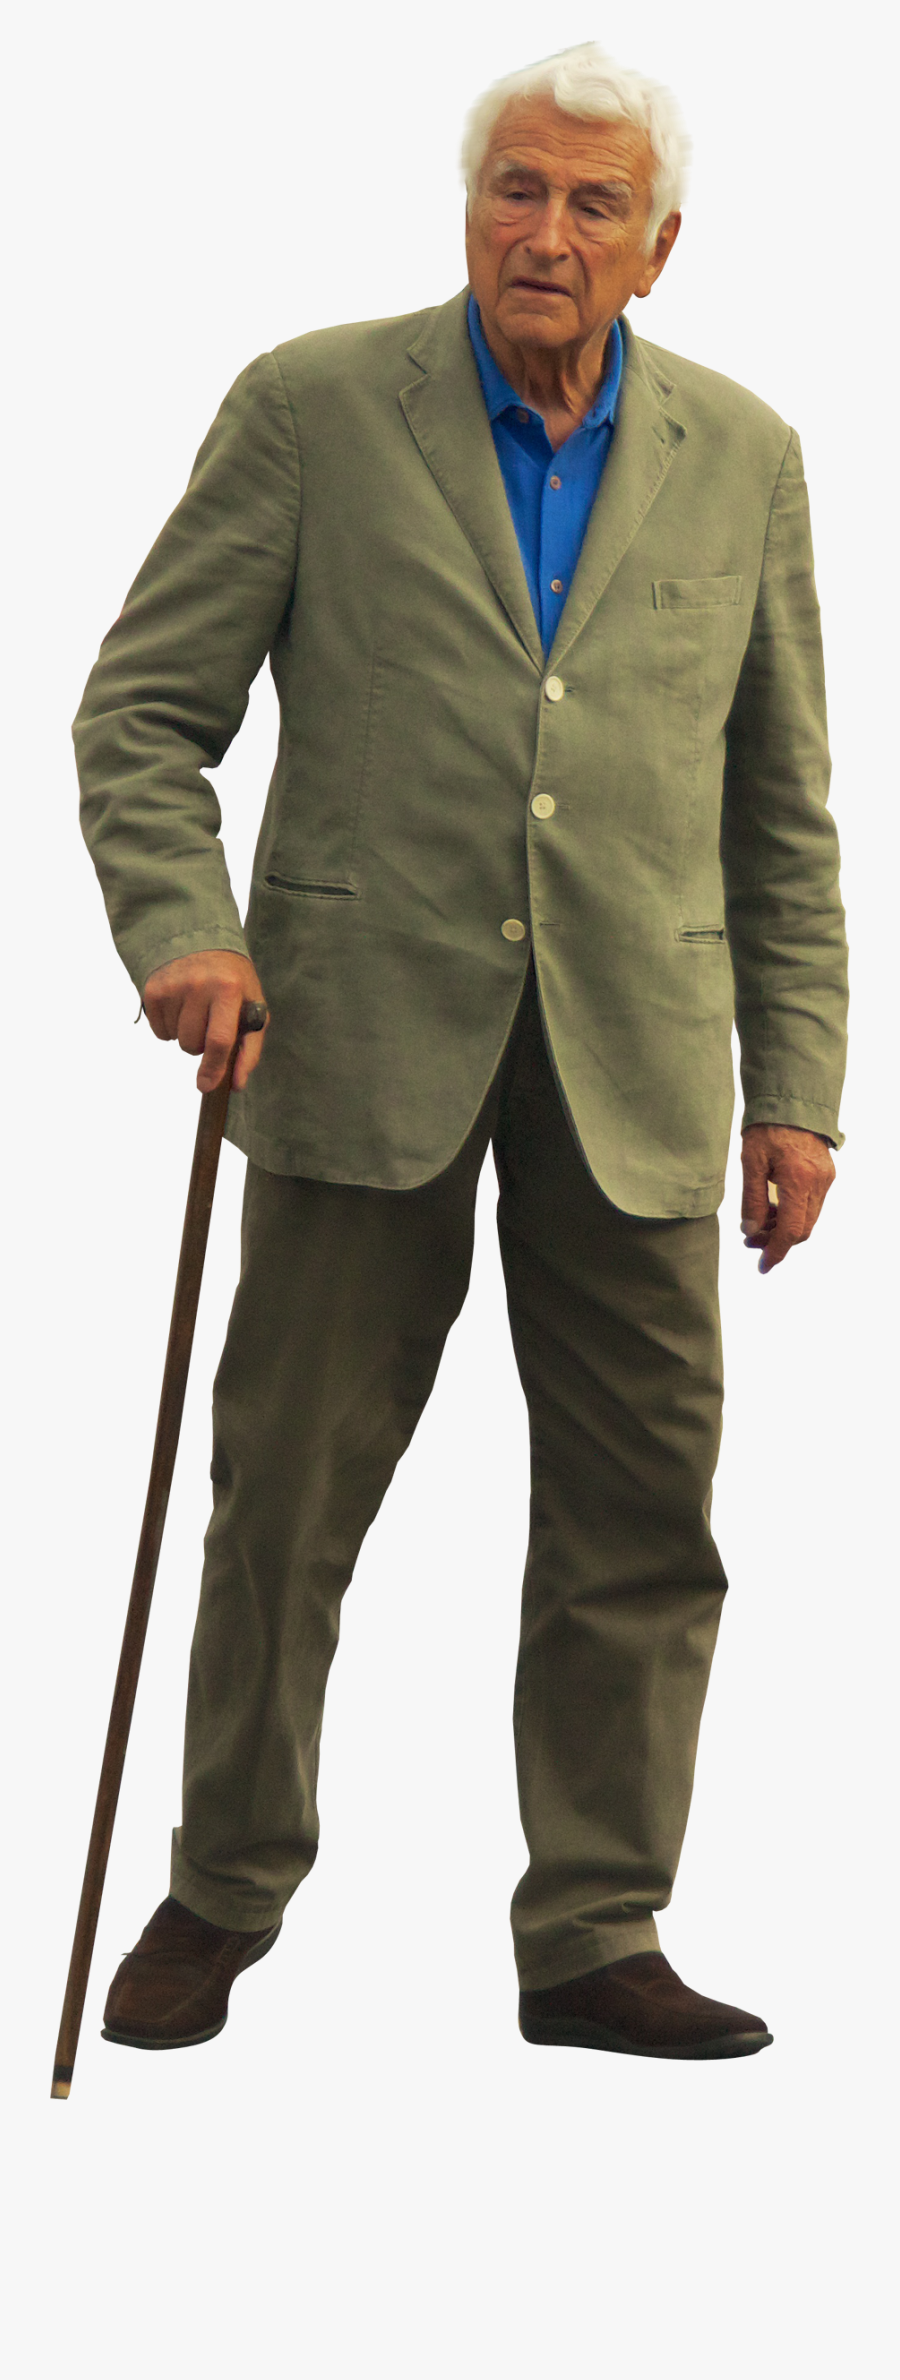 Old Man With Walking Stick Png, Transparent Clipart